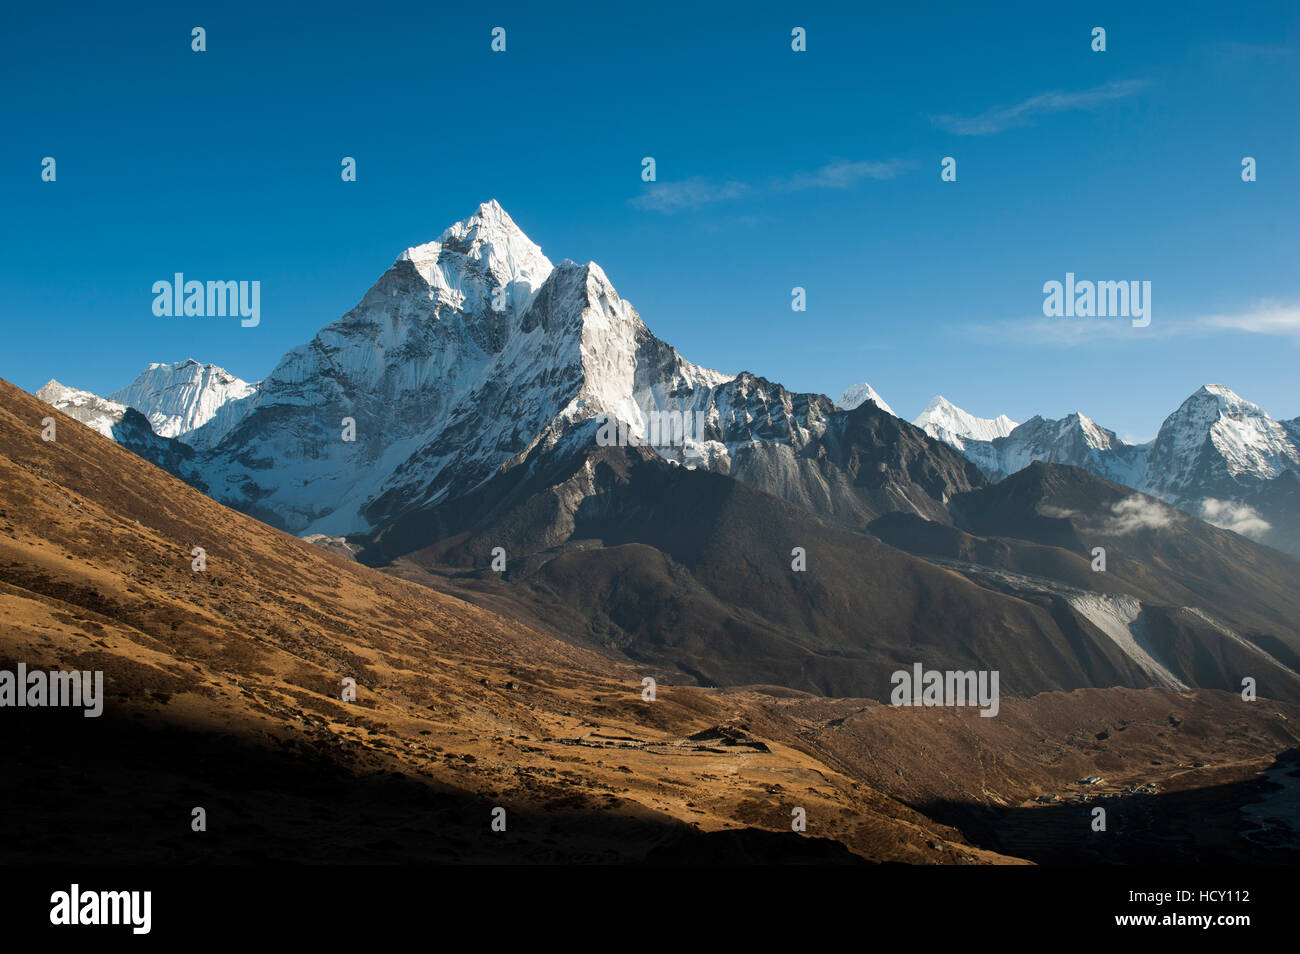 The stunning pointed peak of Ama Dablam, 6812m, seen from Dhukla in the Khumbu Region, Nepal Stock Photo